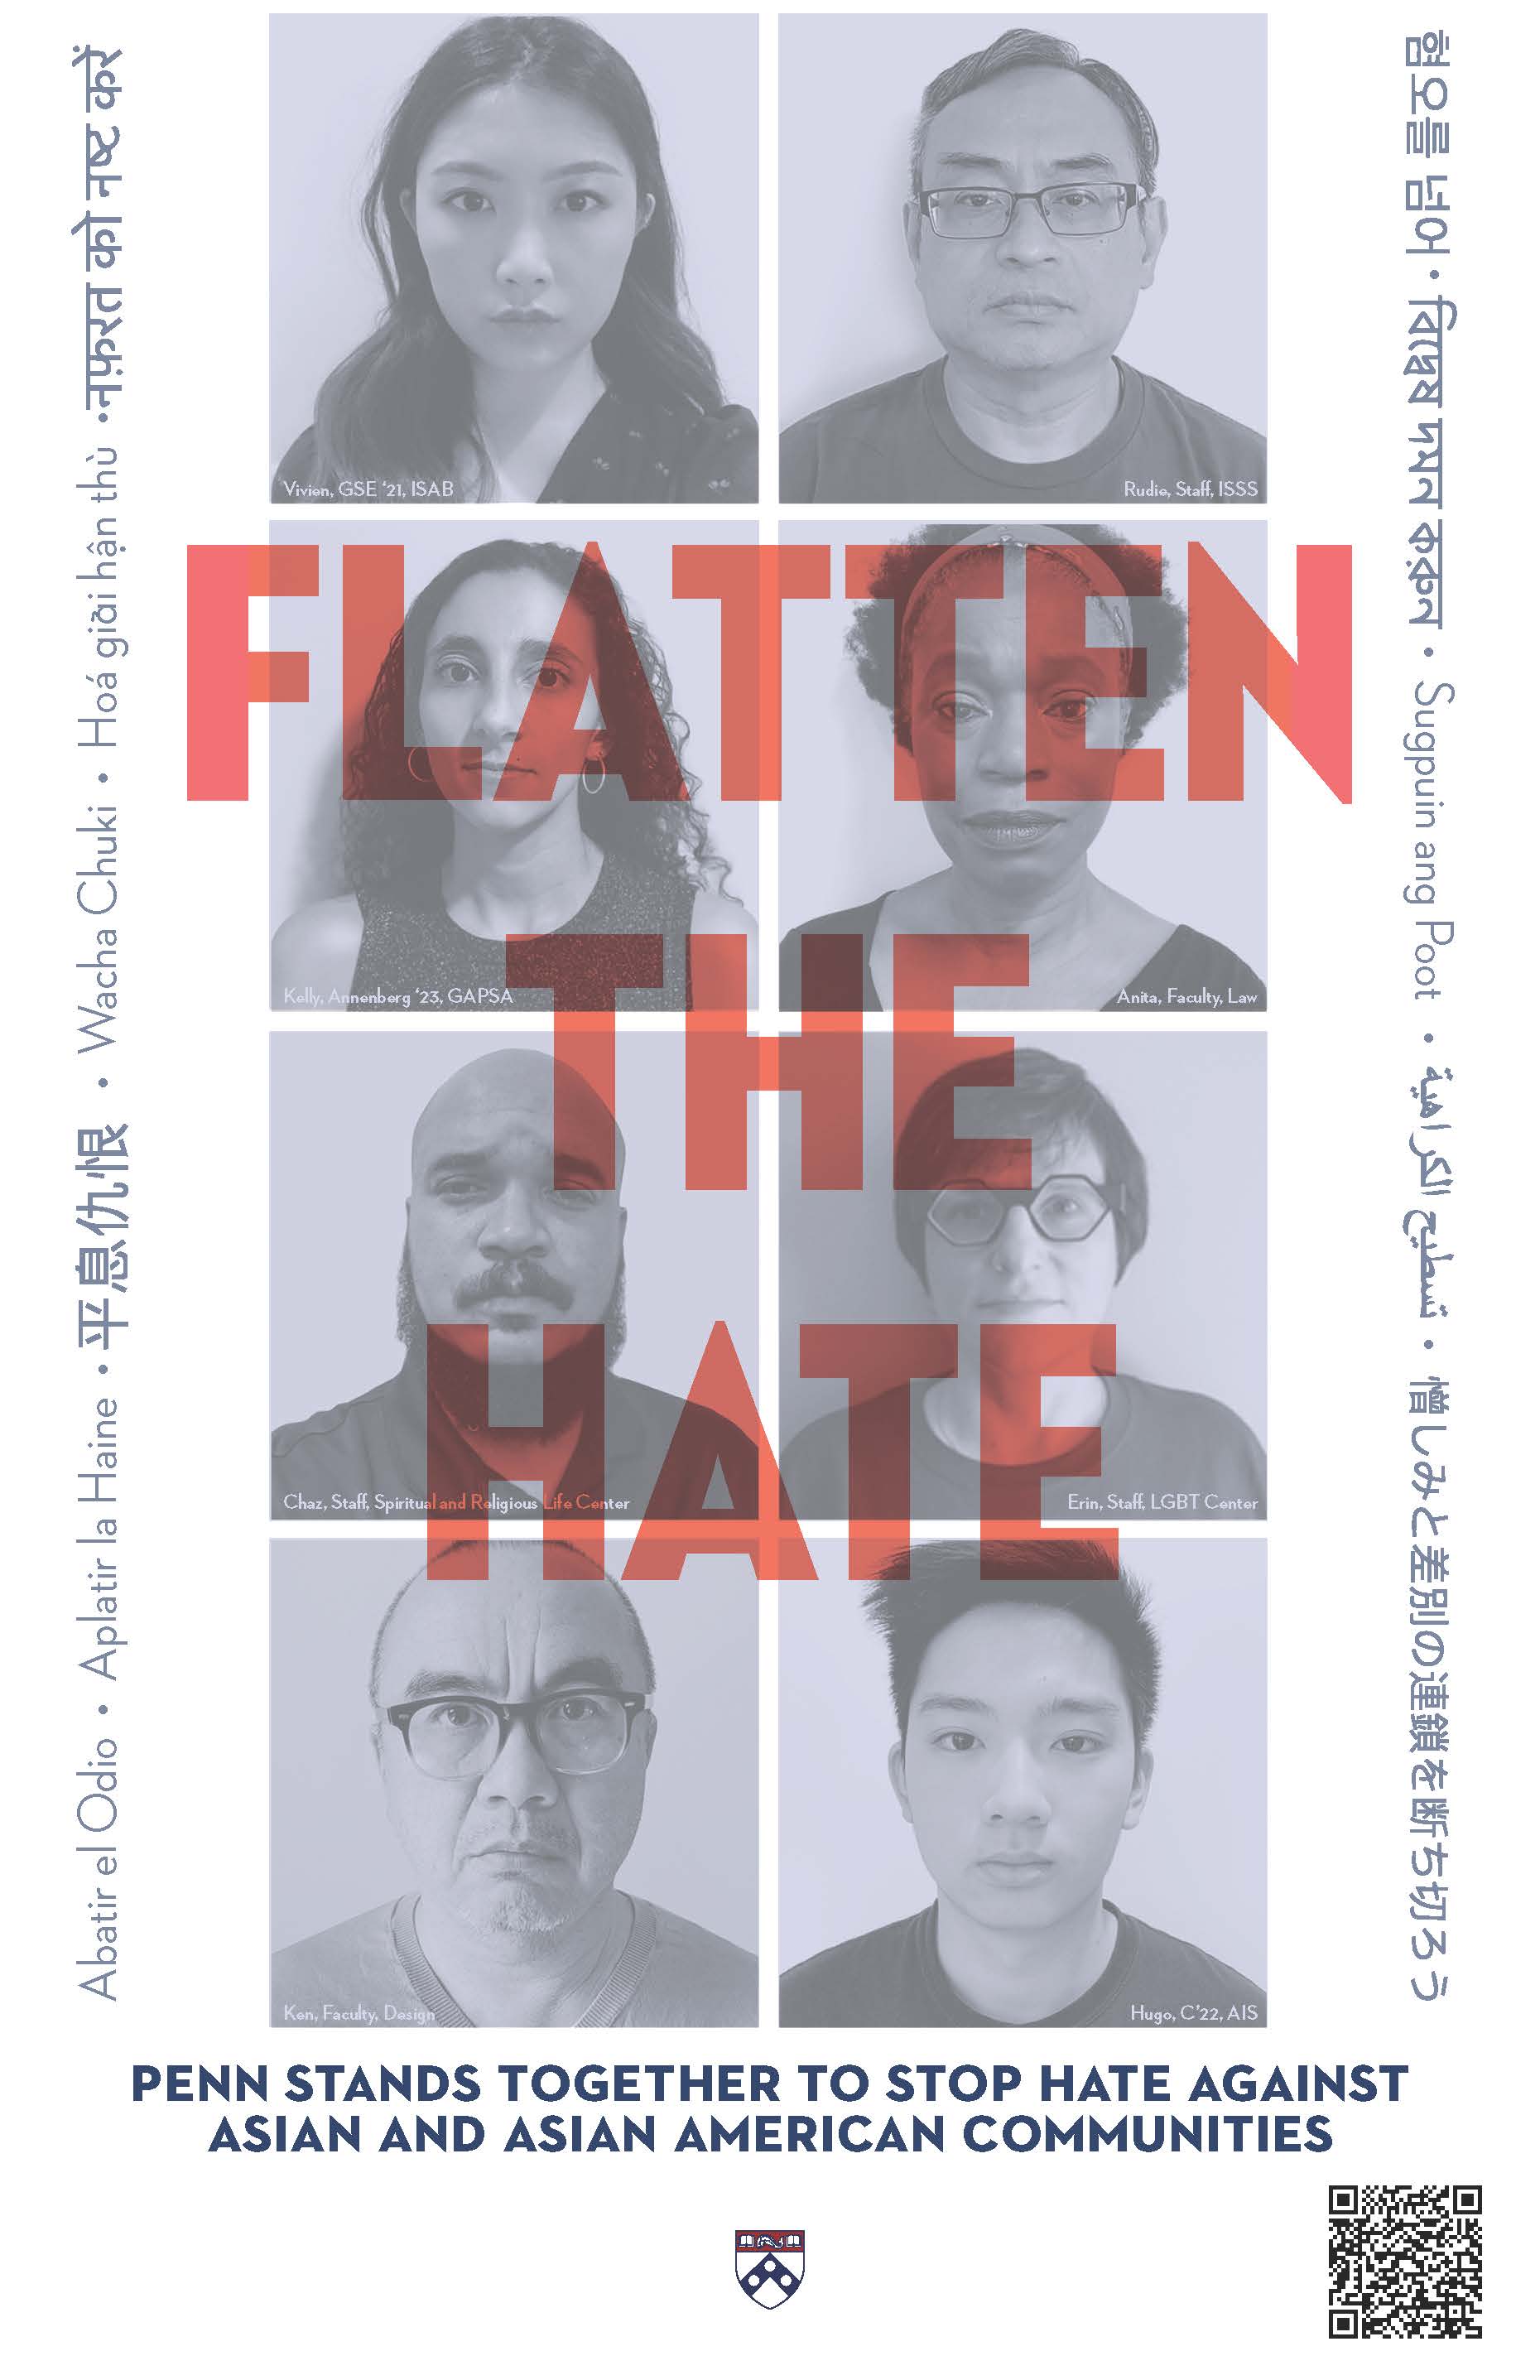 Poster for the #FlattentheHate campaign featuring "Flatten the Hate" in multiple languages and faces of the Penn community